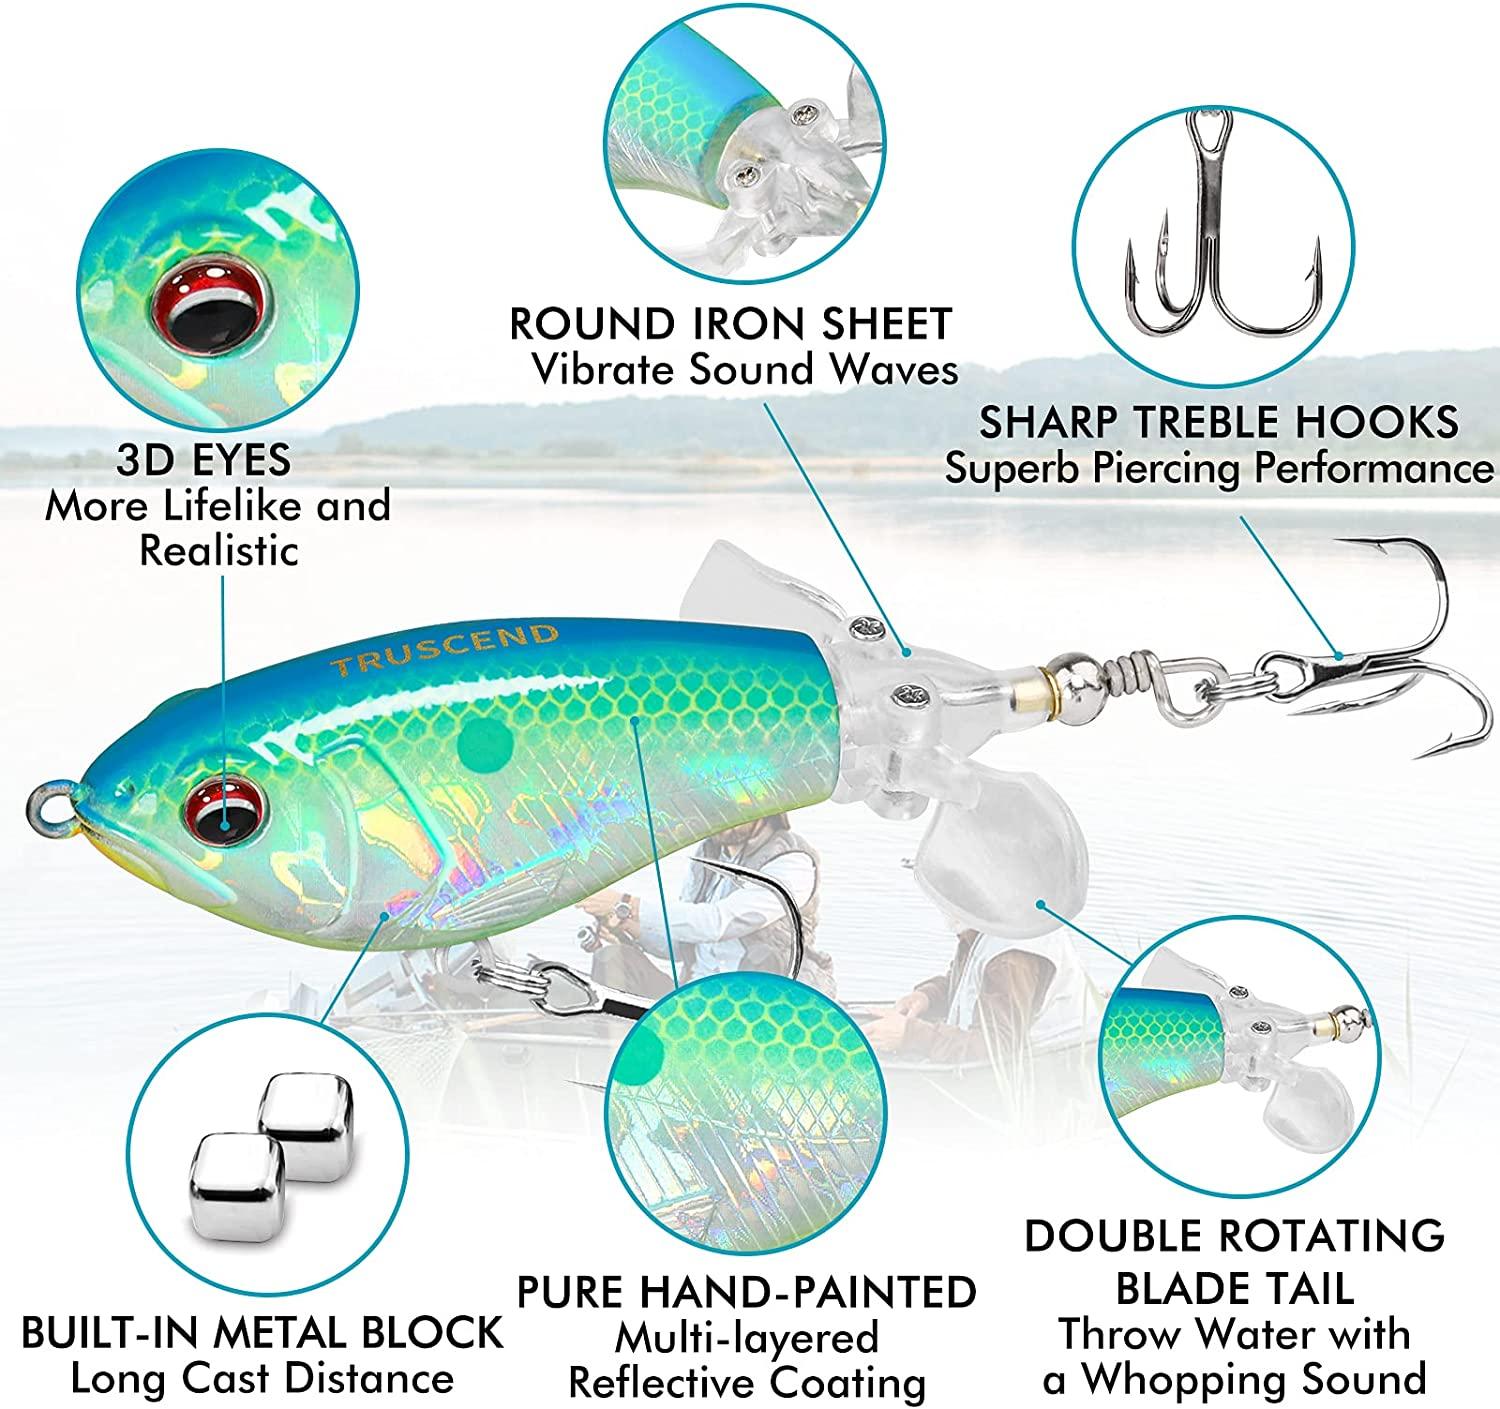 TRUSCEND Topwater Fishing Lures Whopper Fishing Lure with BKK